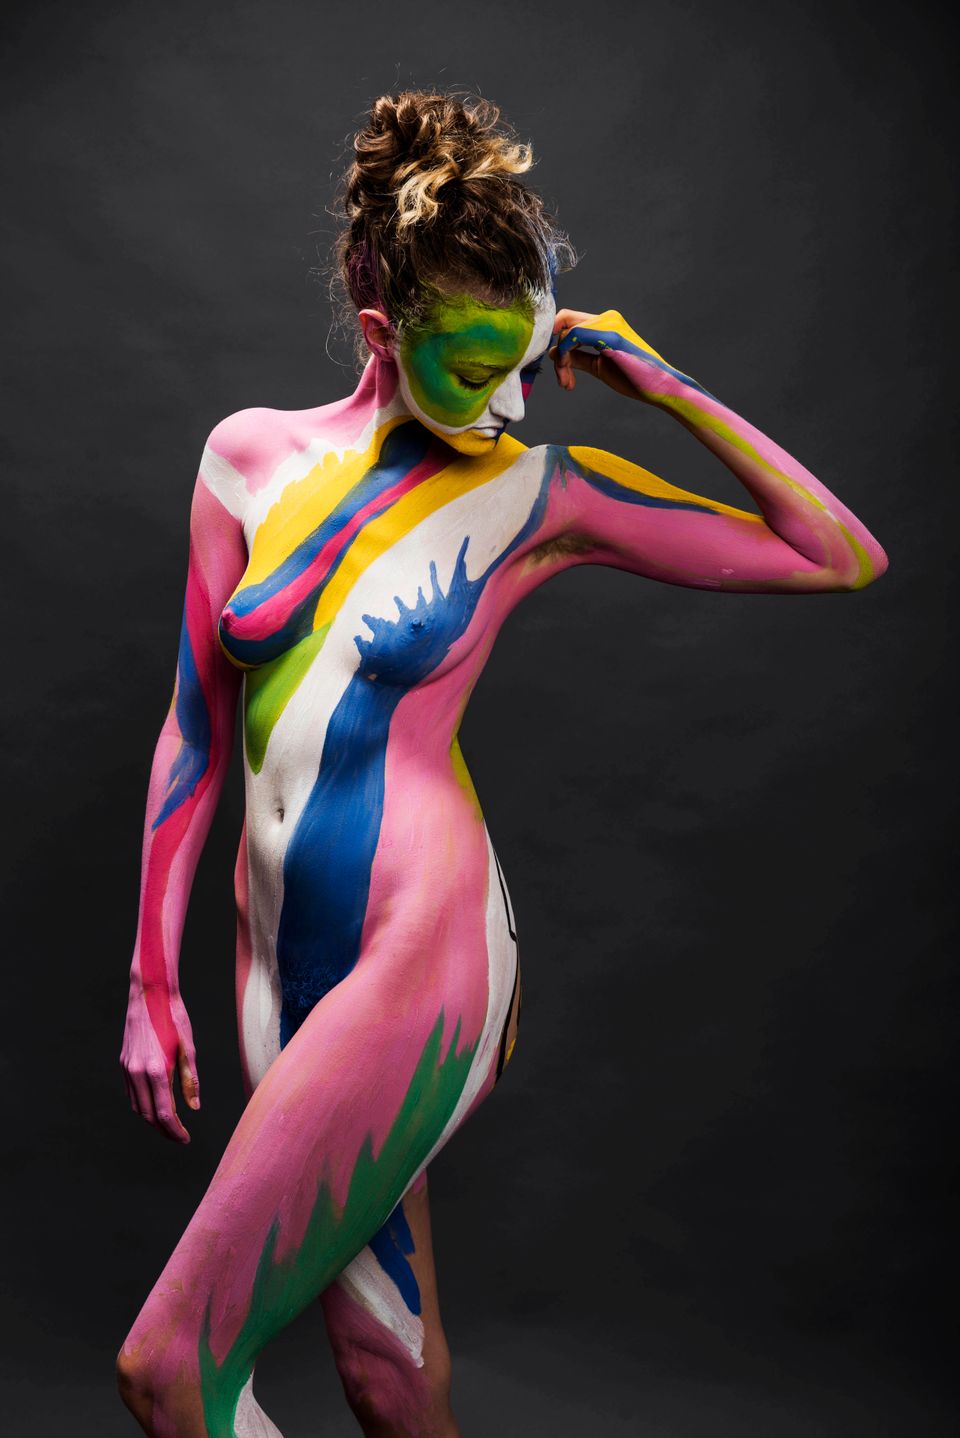 burke hall recommends Best Female Body Painting Photos